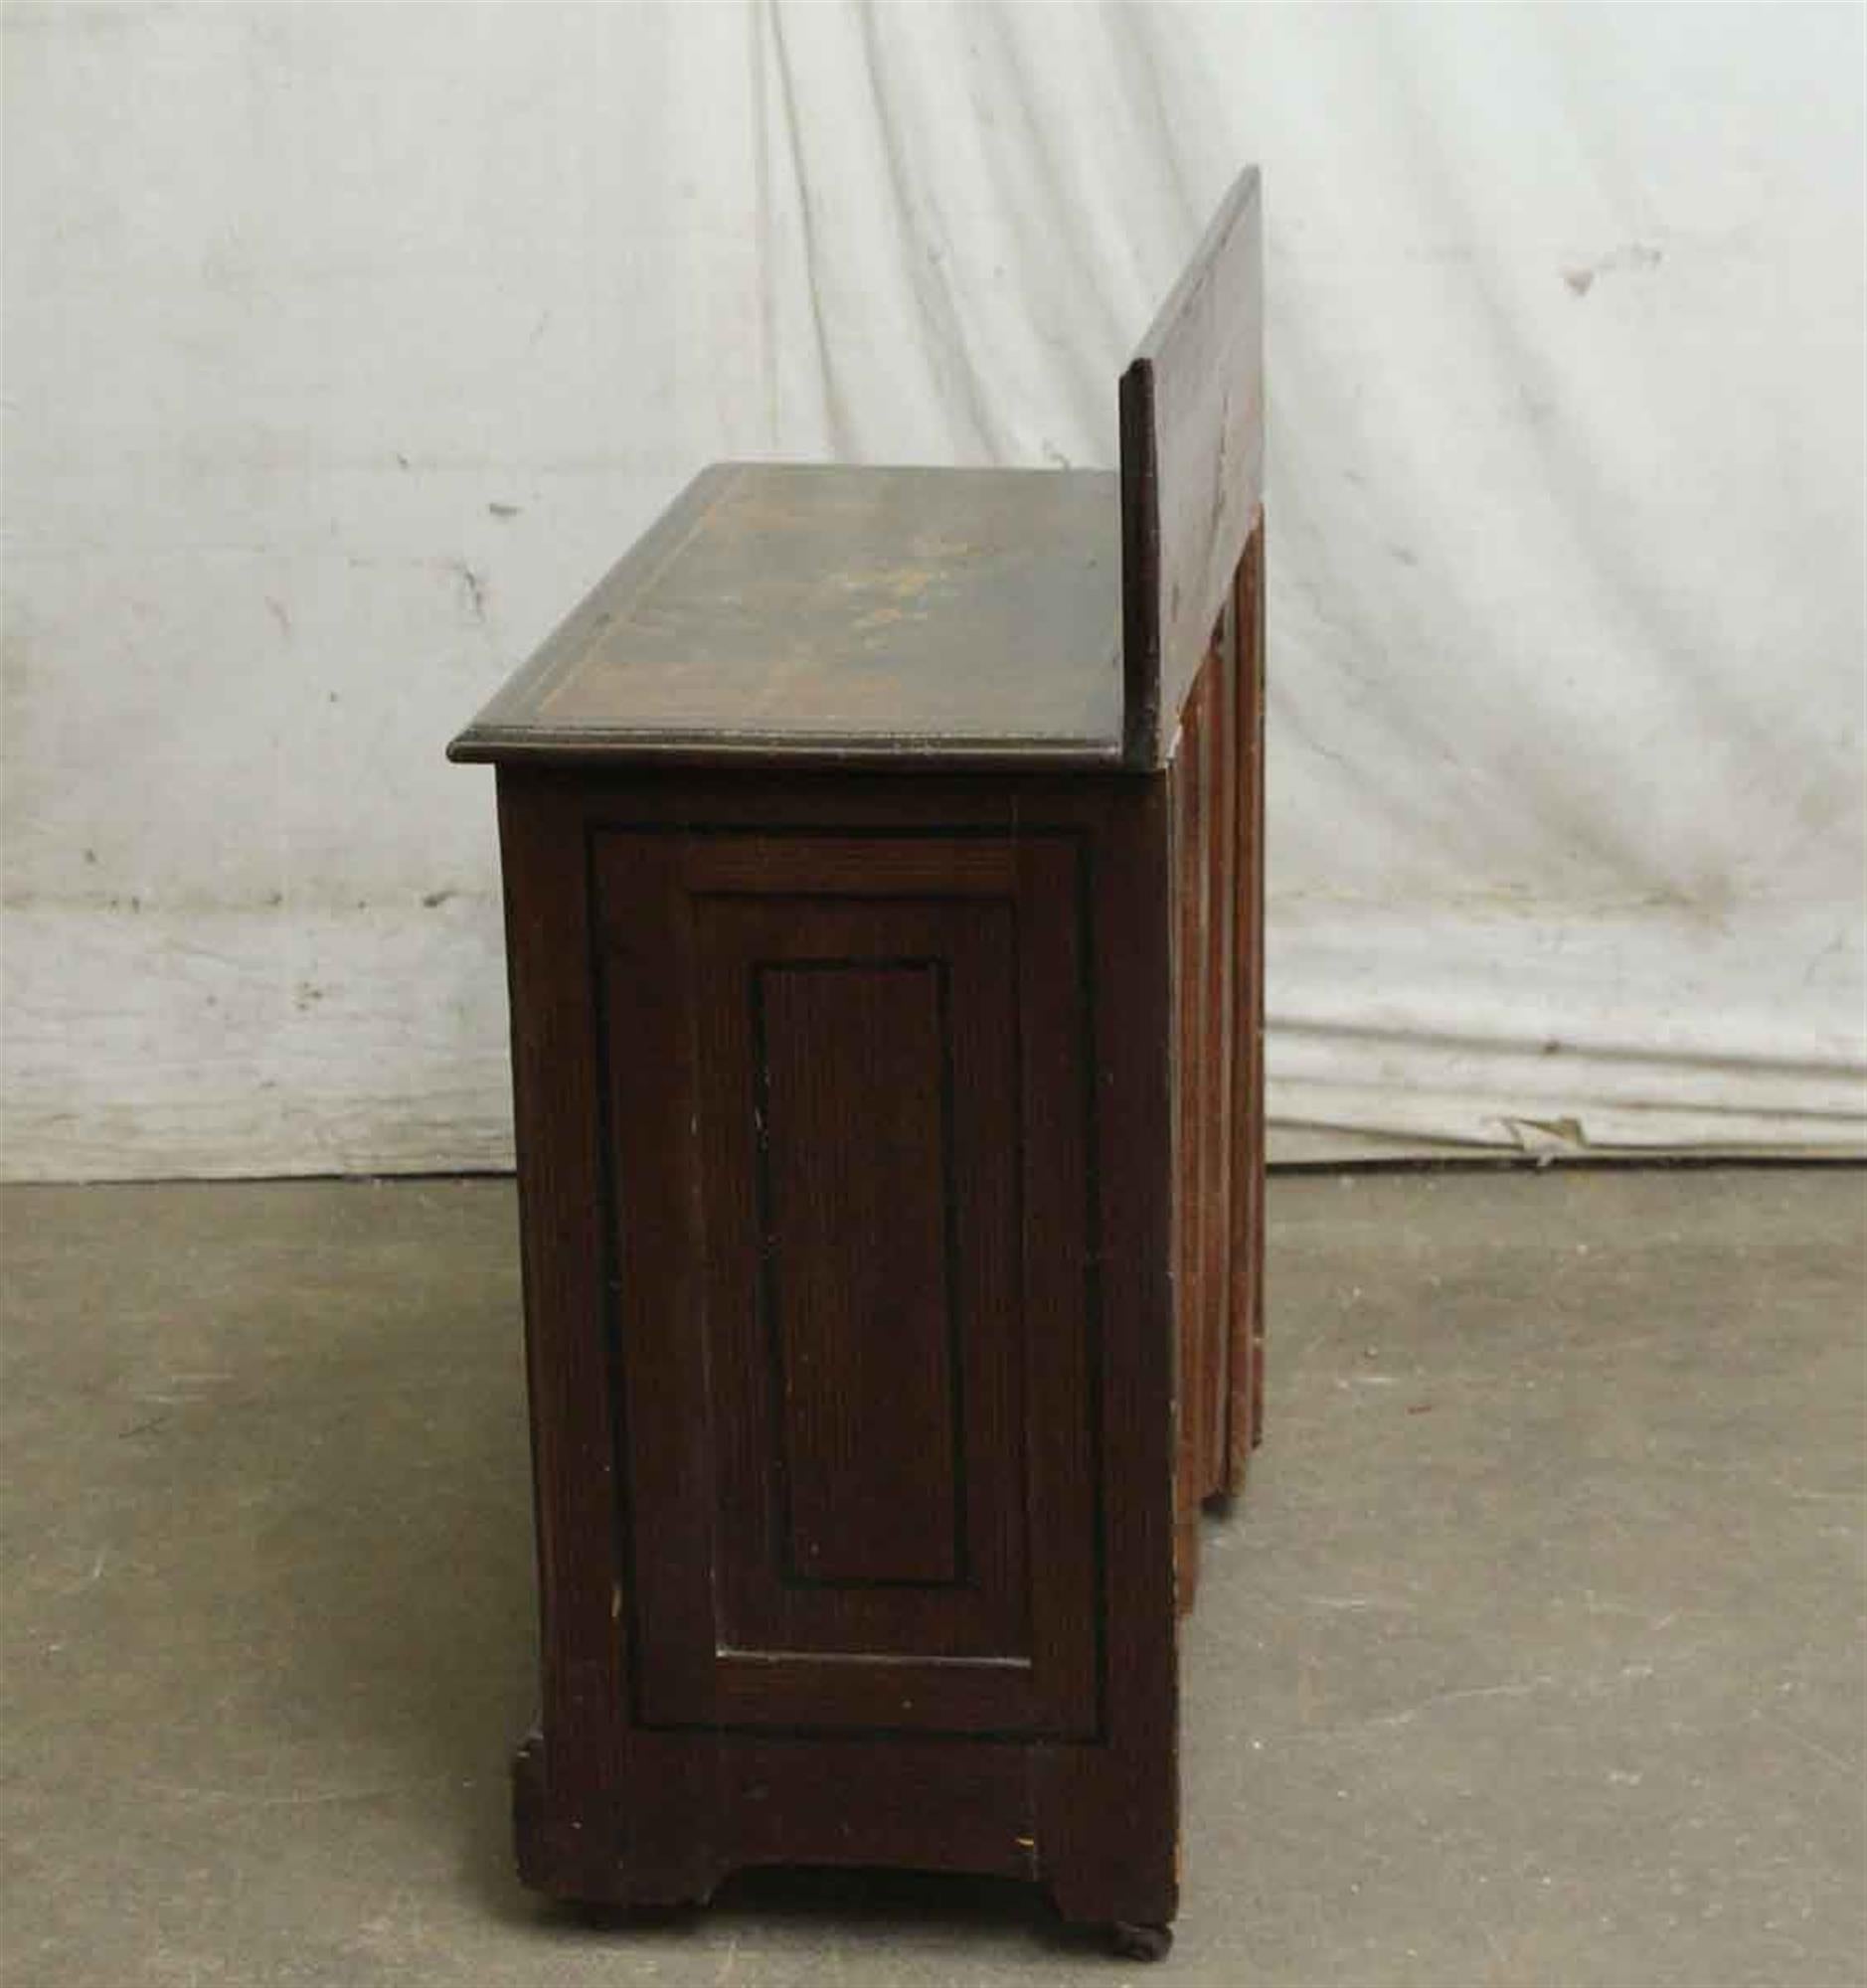 1880s Wooden Dark Tone Wash Stand with a Hand Painted Decorative Finish 6